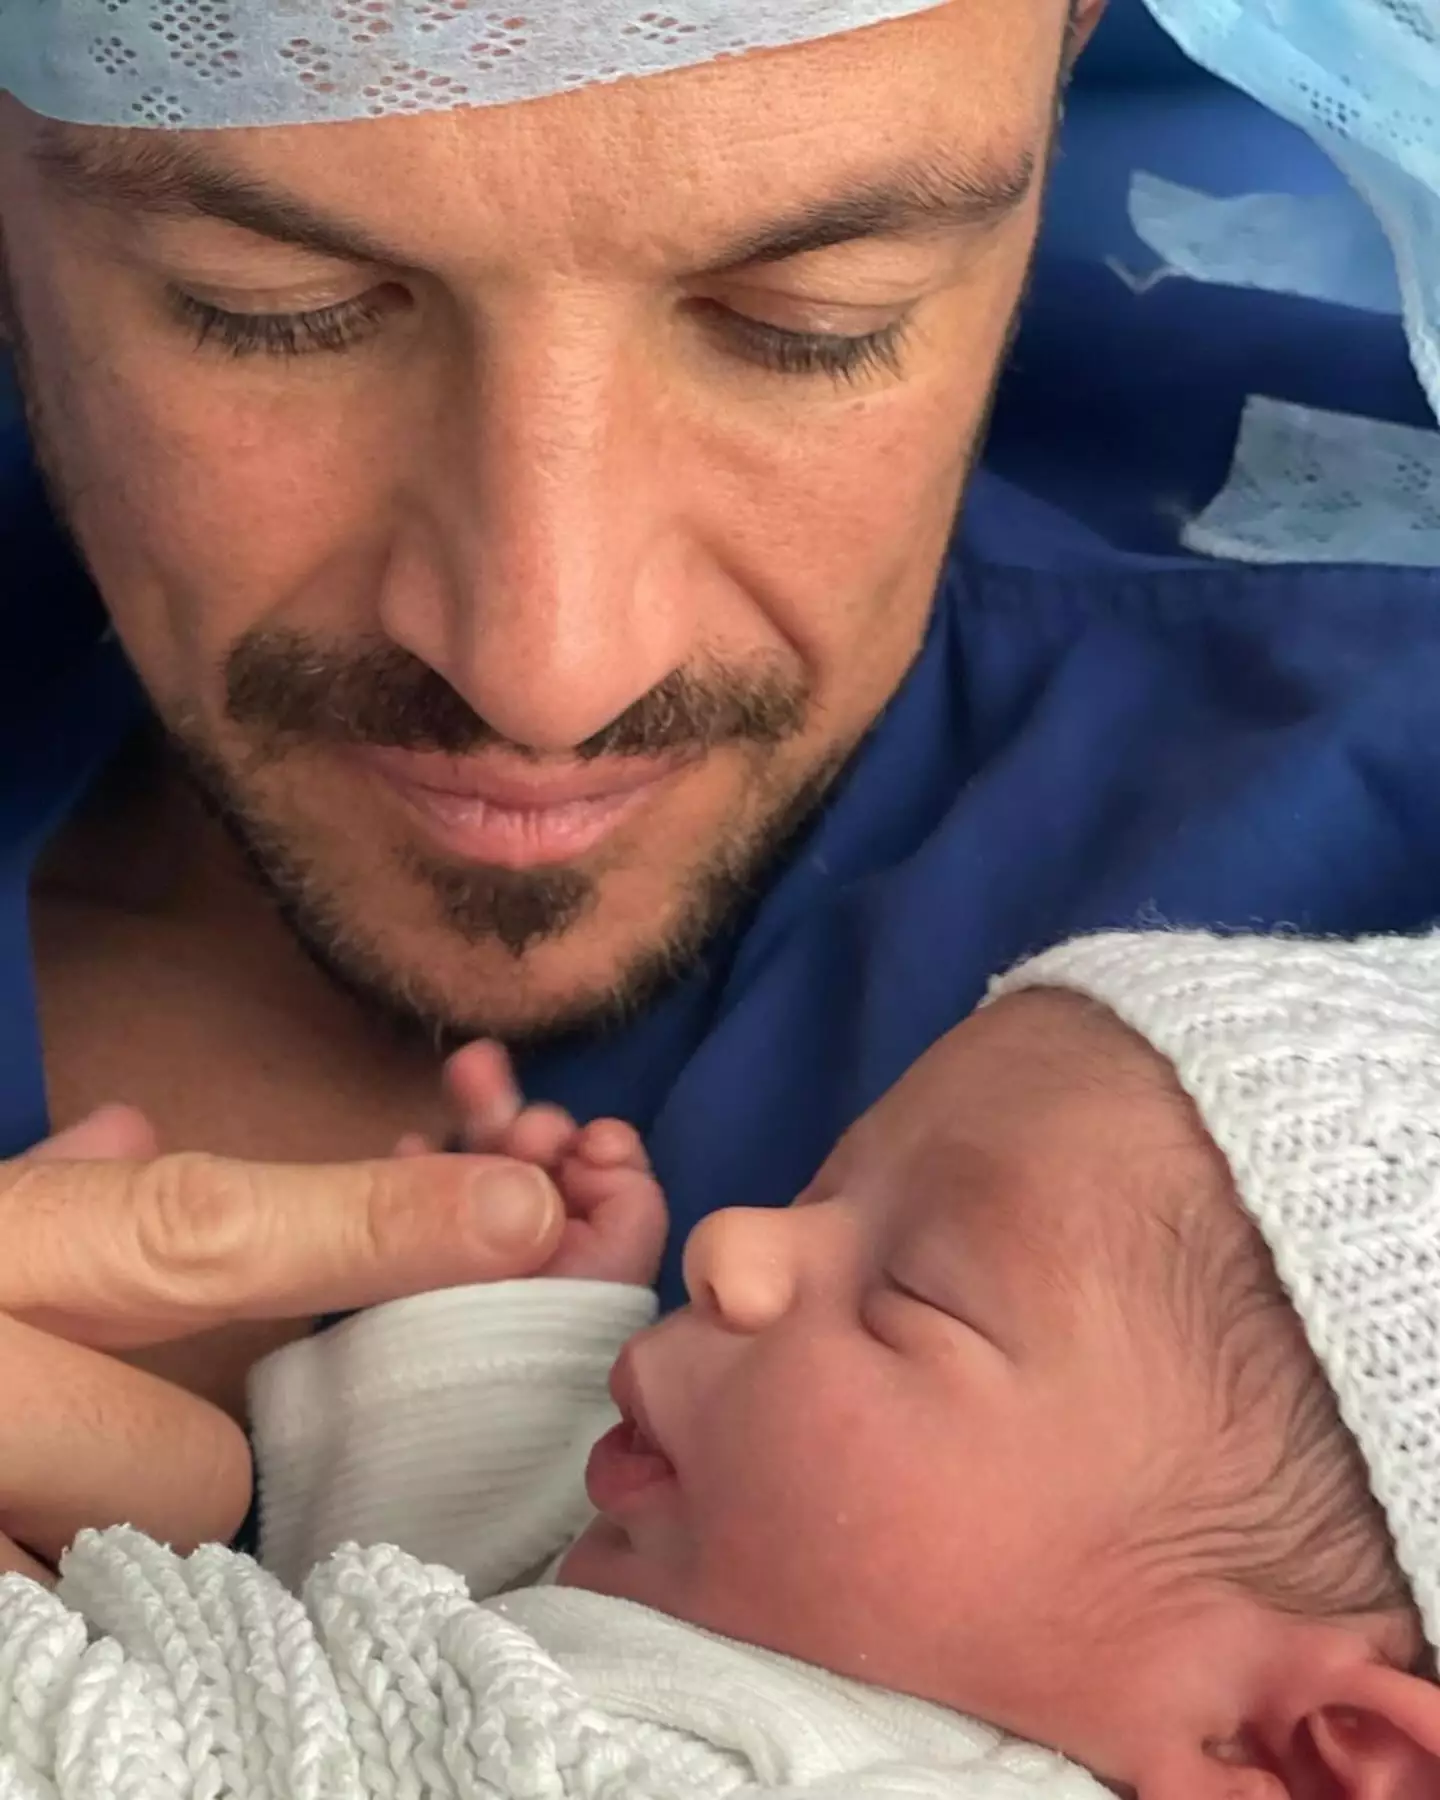 Peter welcomed his latest addition - daughter Arabella - in April. (Instagram/@peterandre)